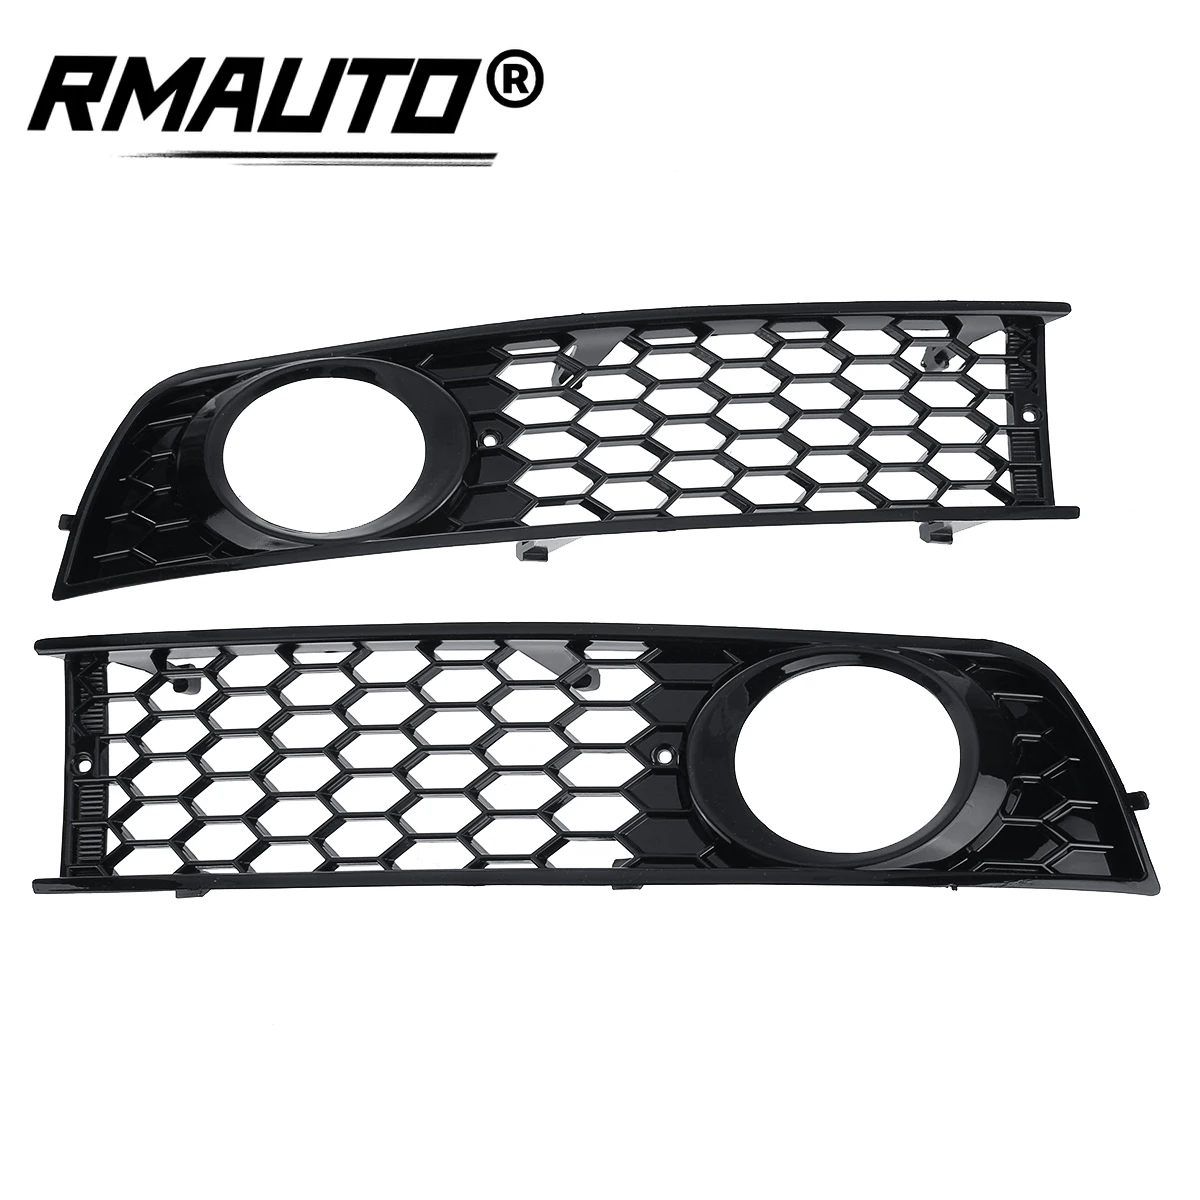 

A Pair Mesh Car Front Side Fog Light Lamp Open Vent Grill Grille Honeycomb Hex For Audi A4 B6 2001-2005 Fog Light Grill Bumper